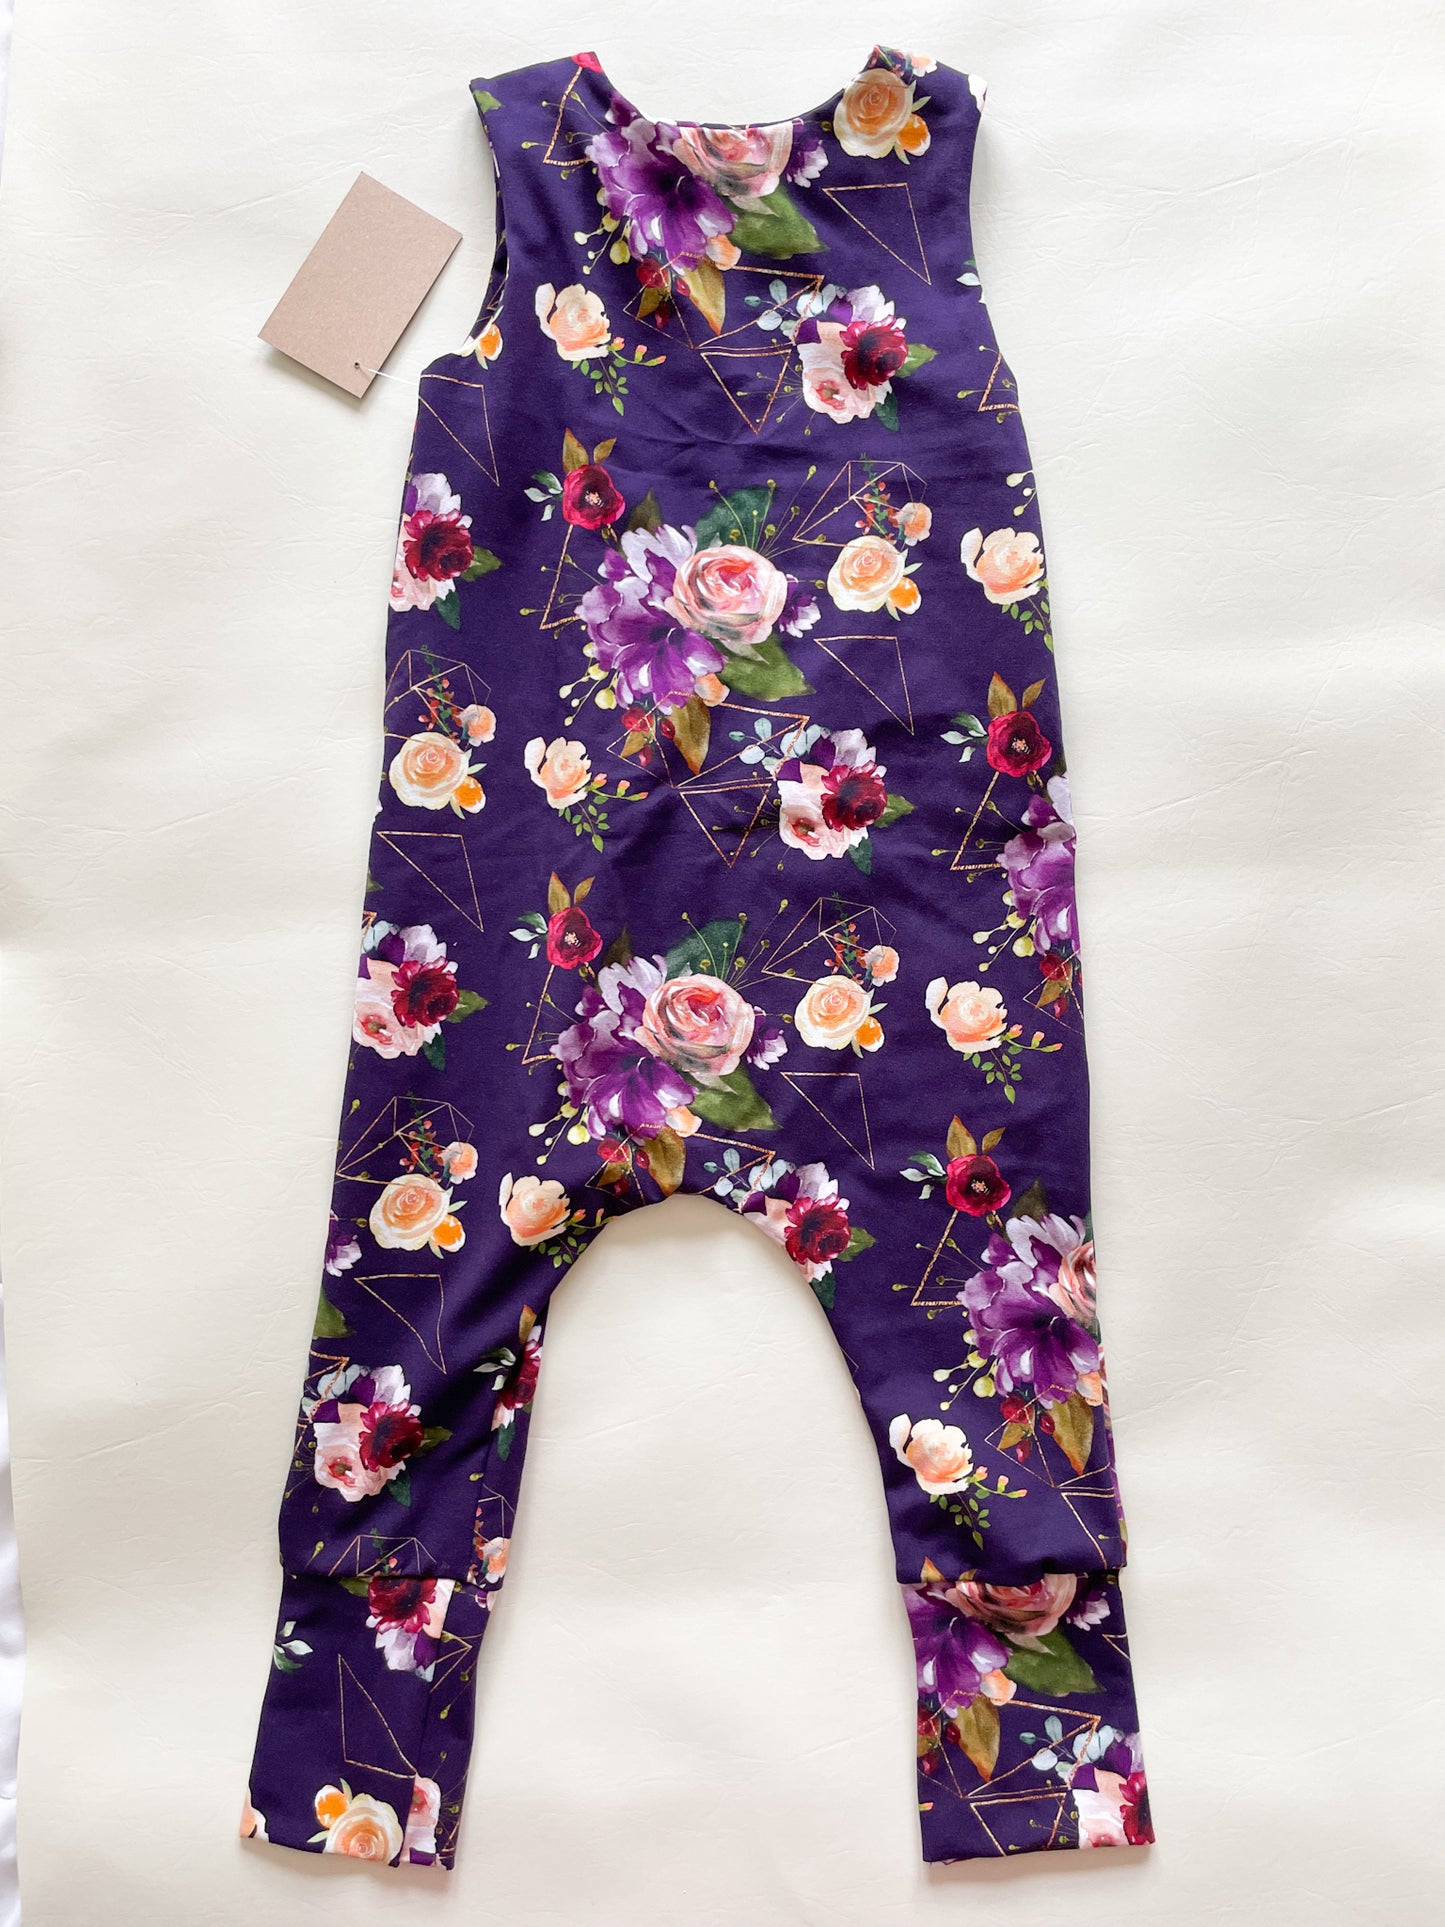 Dark Floral Geometric Grow-With-Me Toddler Jumpsuit - 6 Months to 3 Years